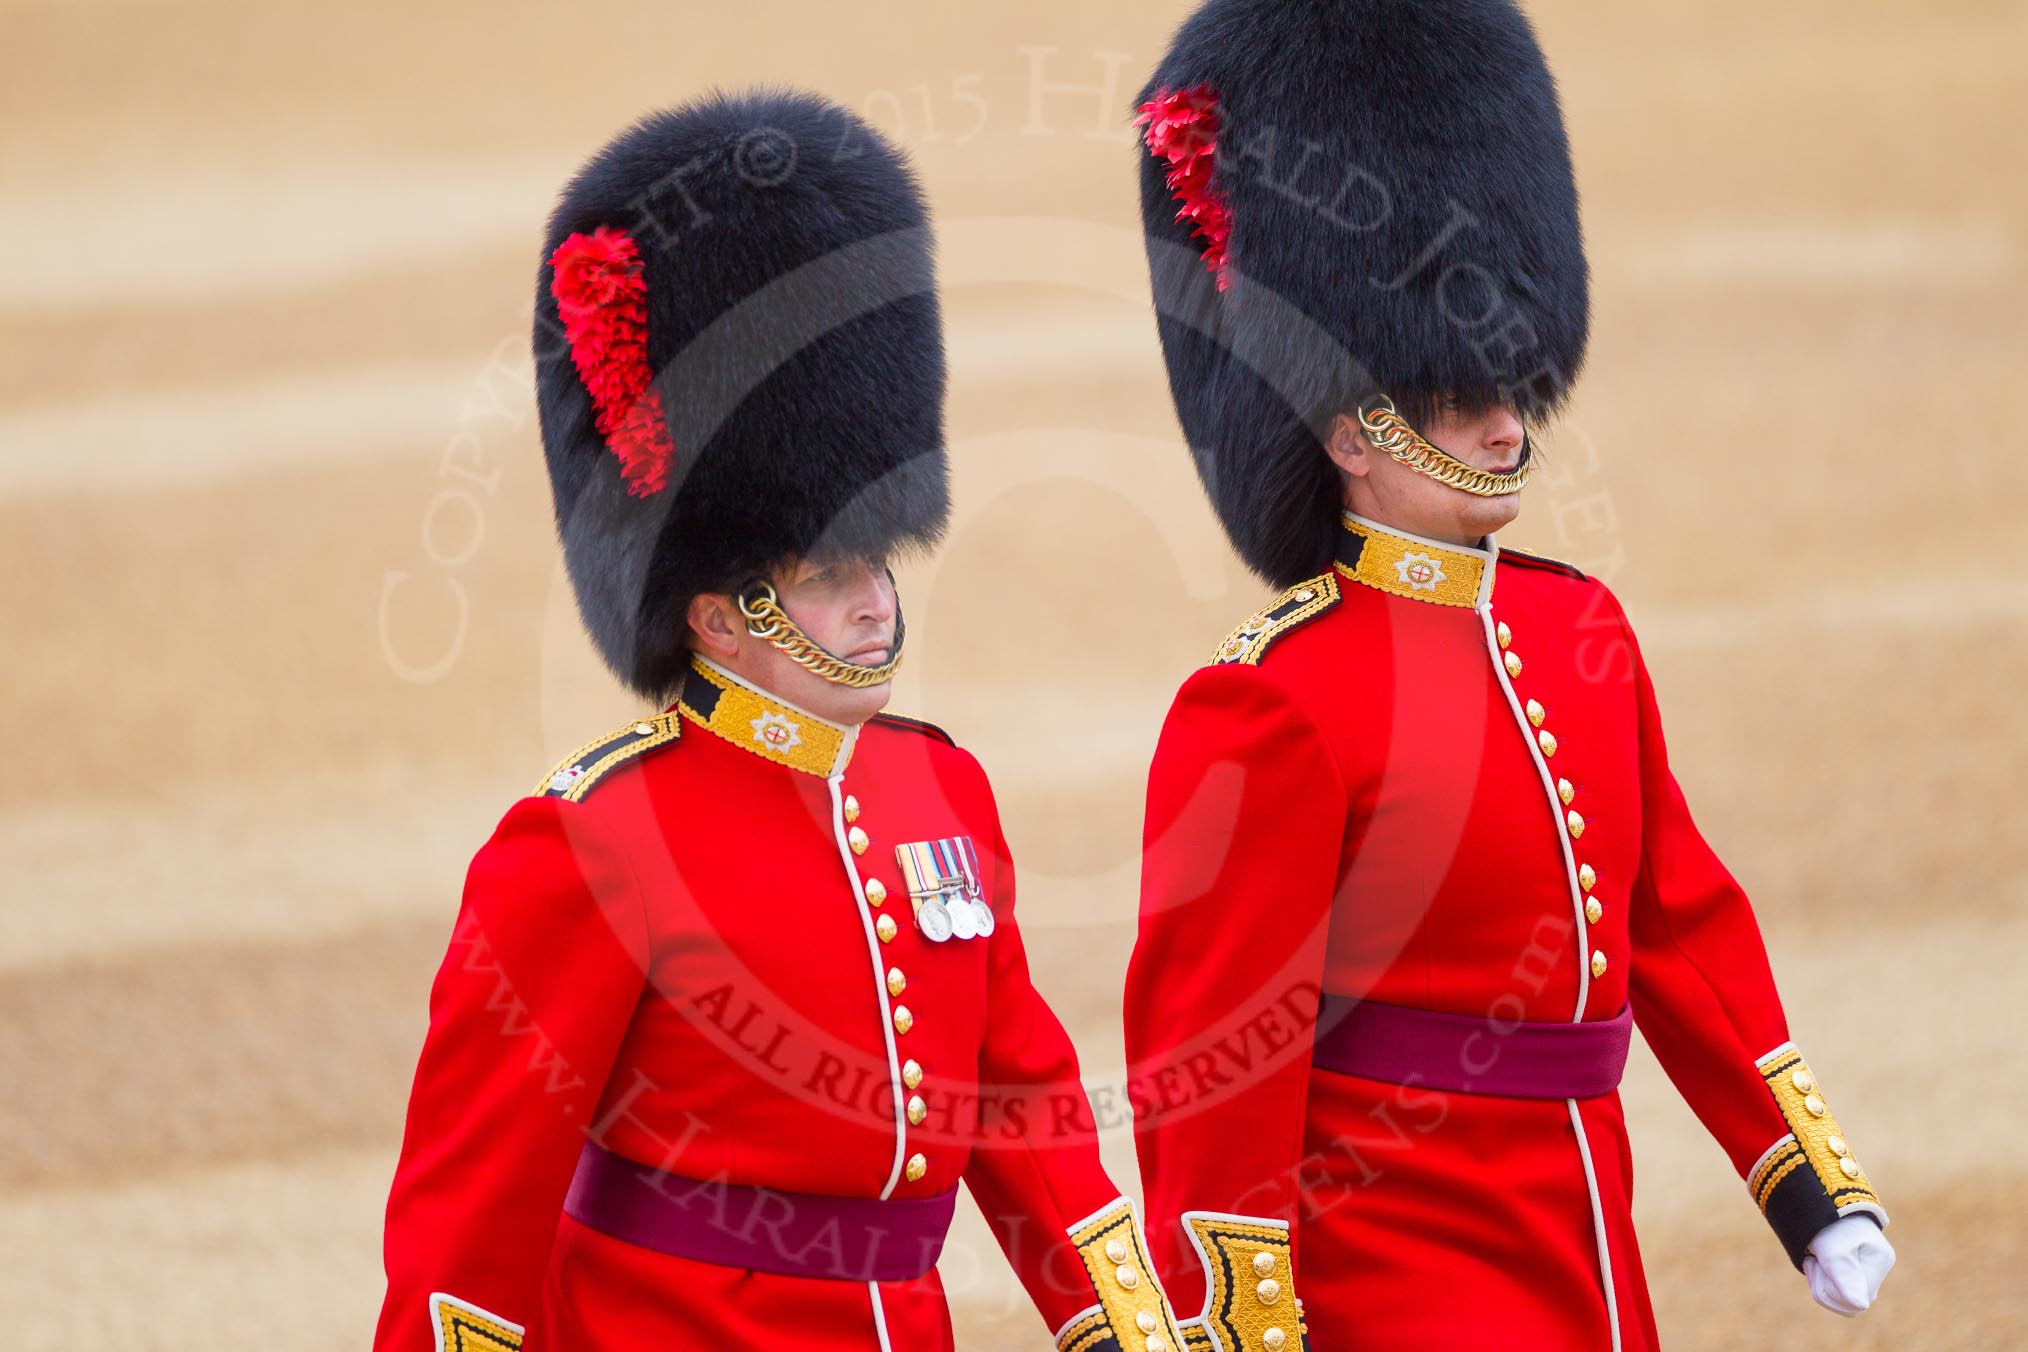 The Colonel's Review 2016.
Horse Guards Parade, Westminster,
London,

United Kingdom,
on 04 June 2016 at 10:05, image #27